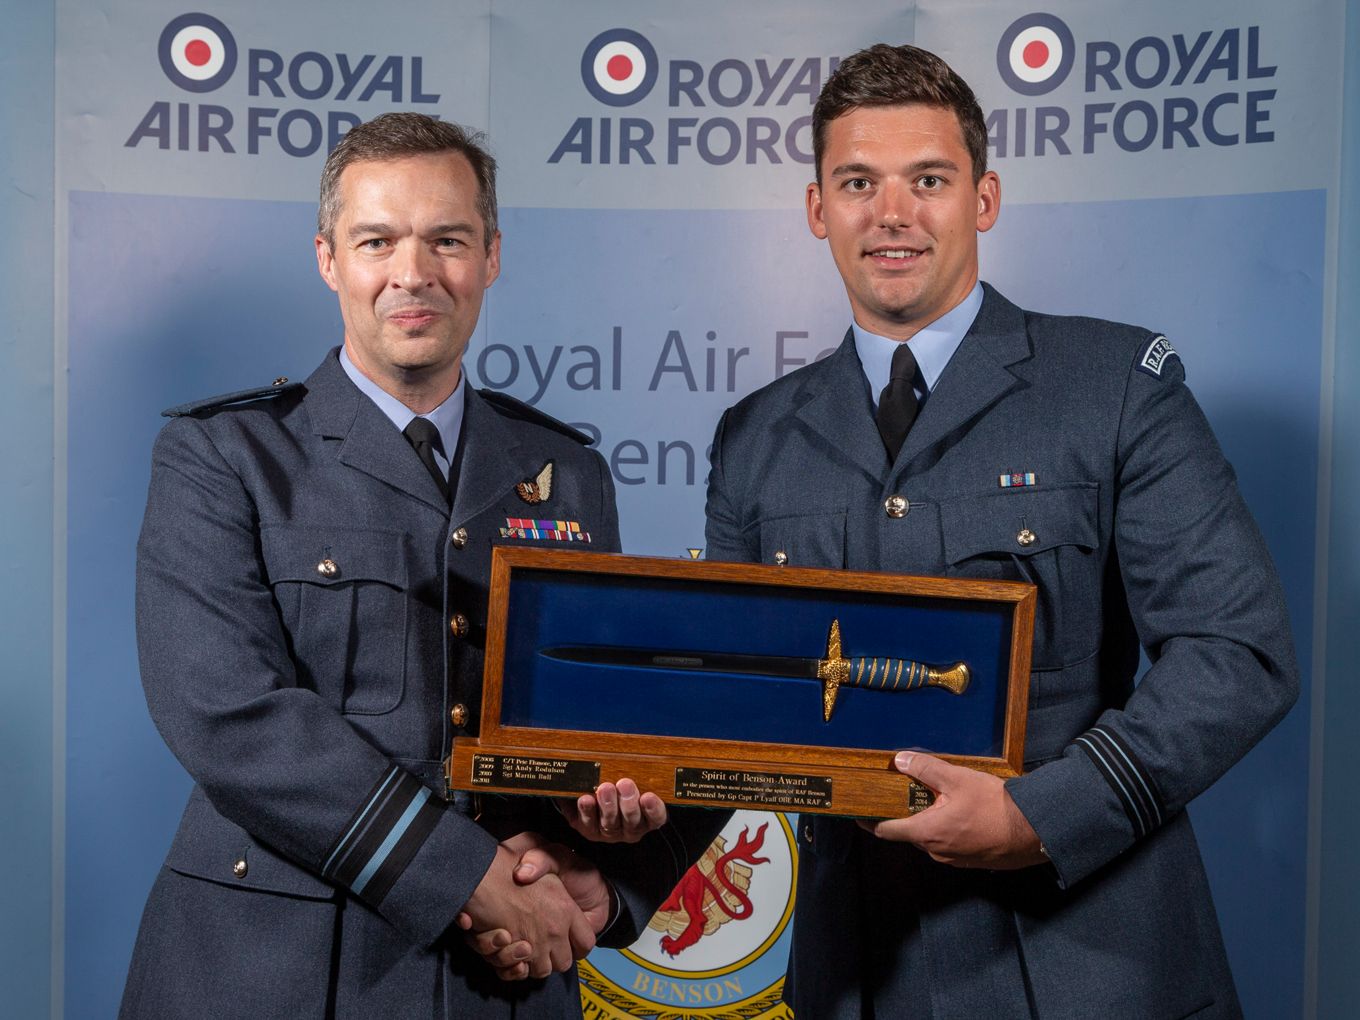 Flight Lieutenant Carter is presented with his award